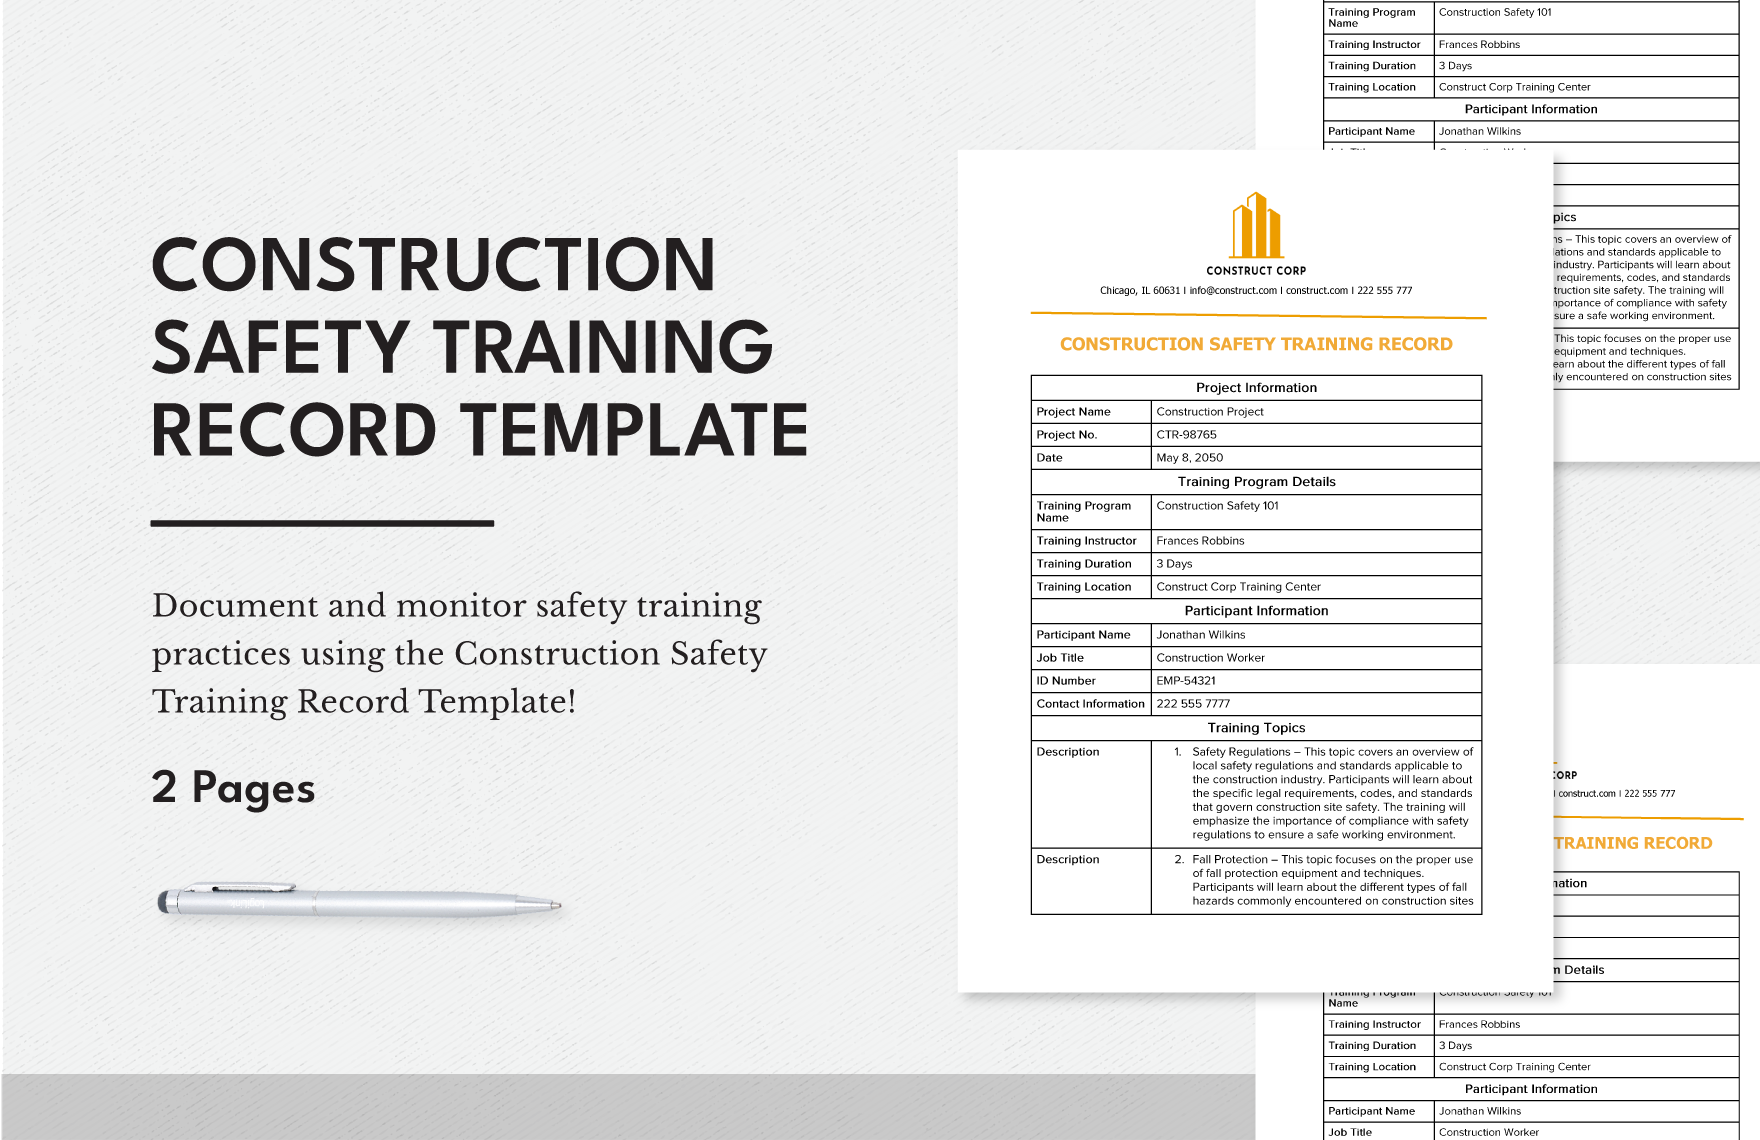 Construction Safety Training Record Template